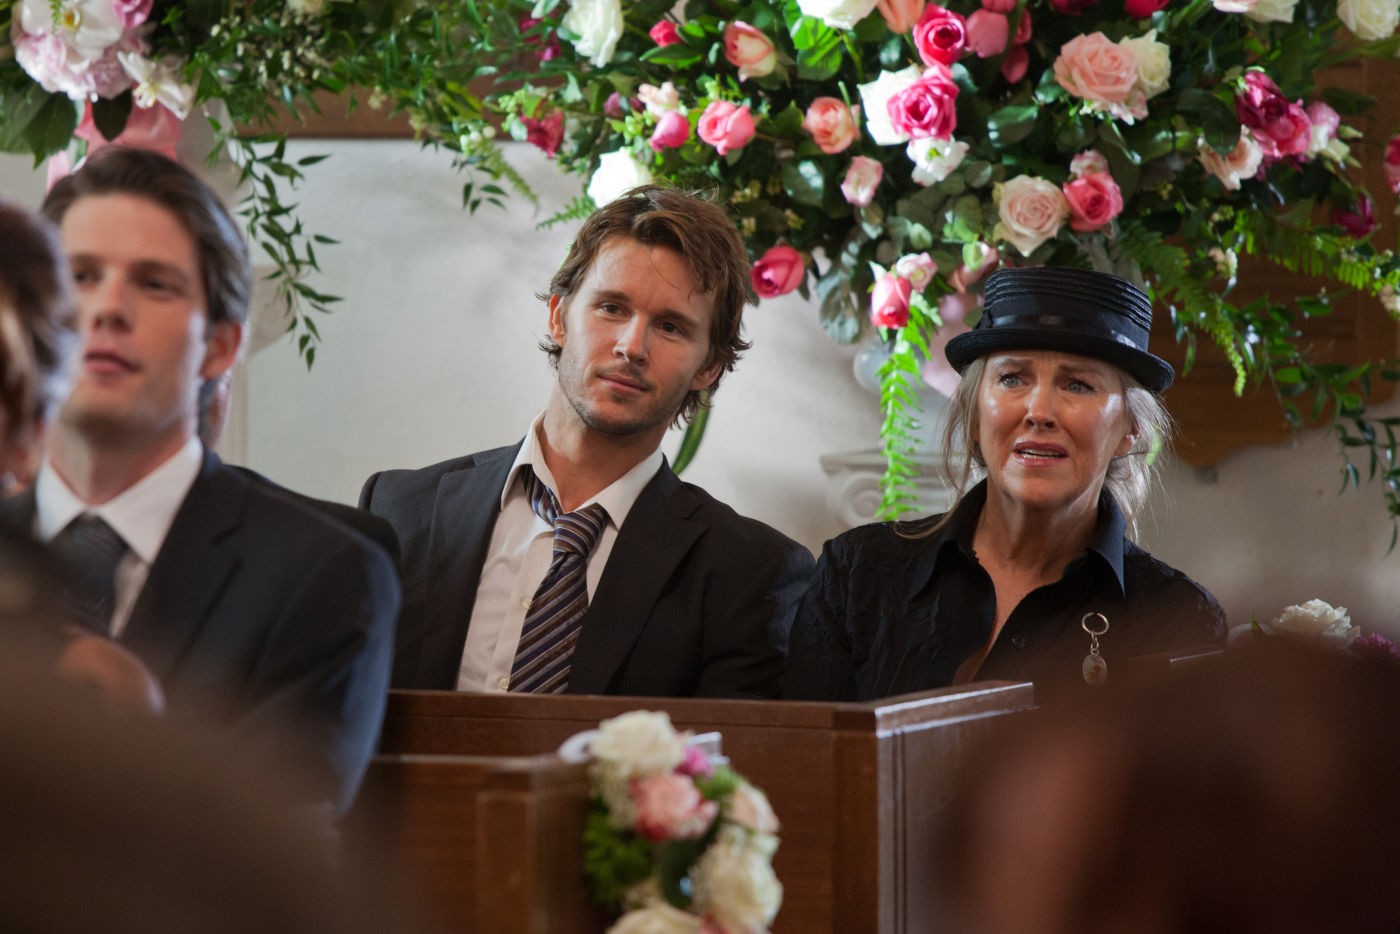 Ryan Kwanten stars as Leo Palamino in Magnolia Pictures' The Right Kind of Wrong (2014)